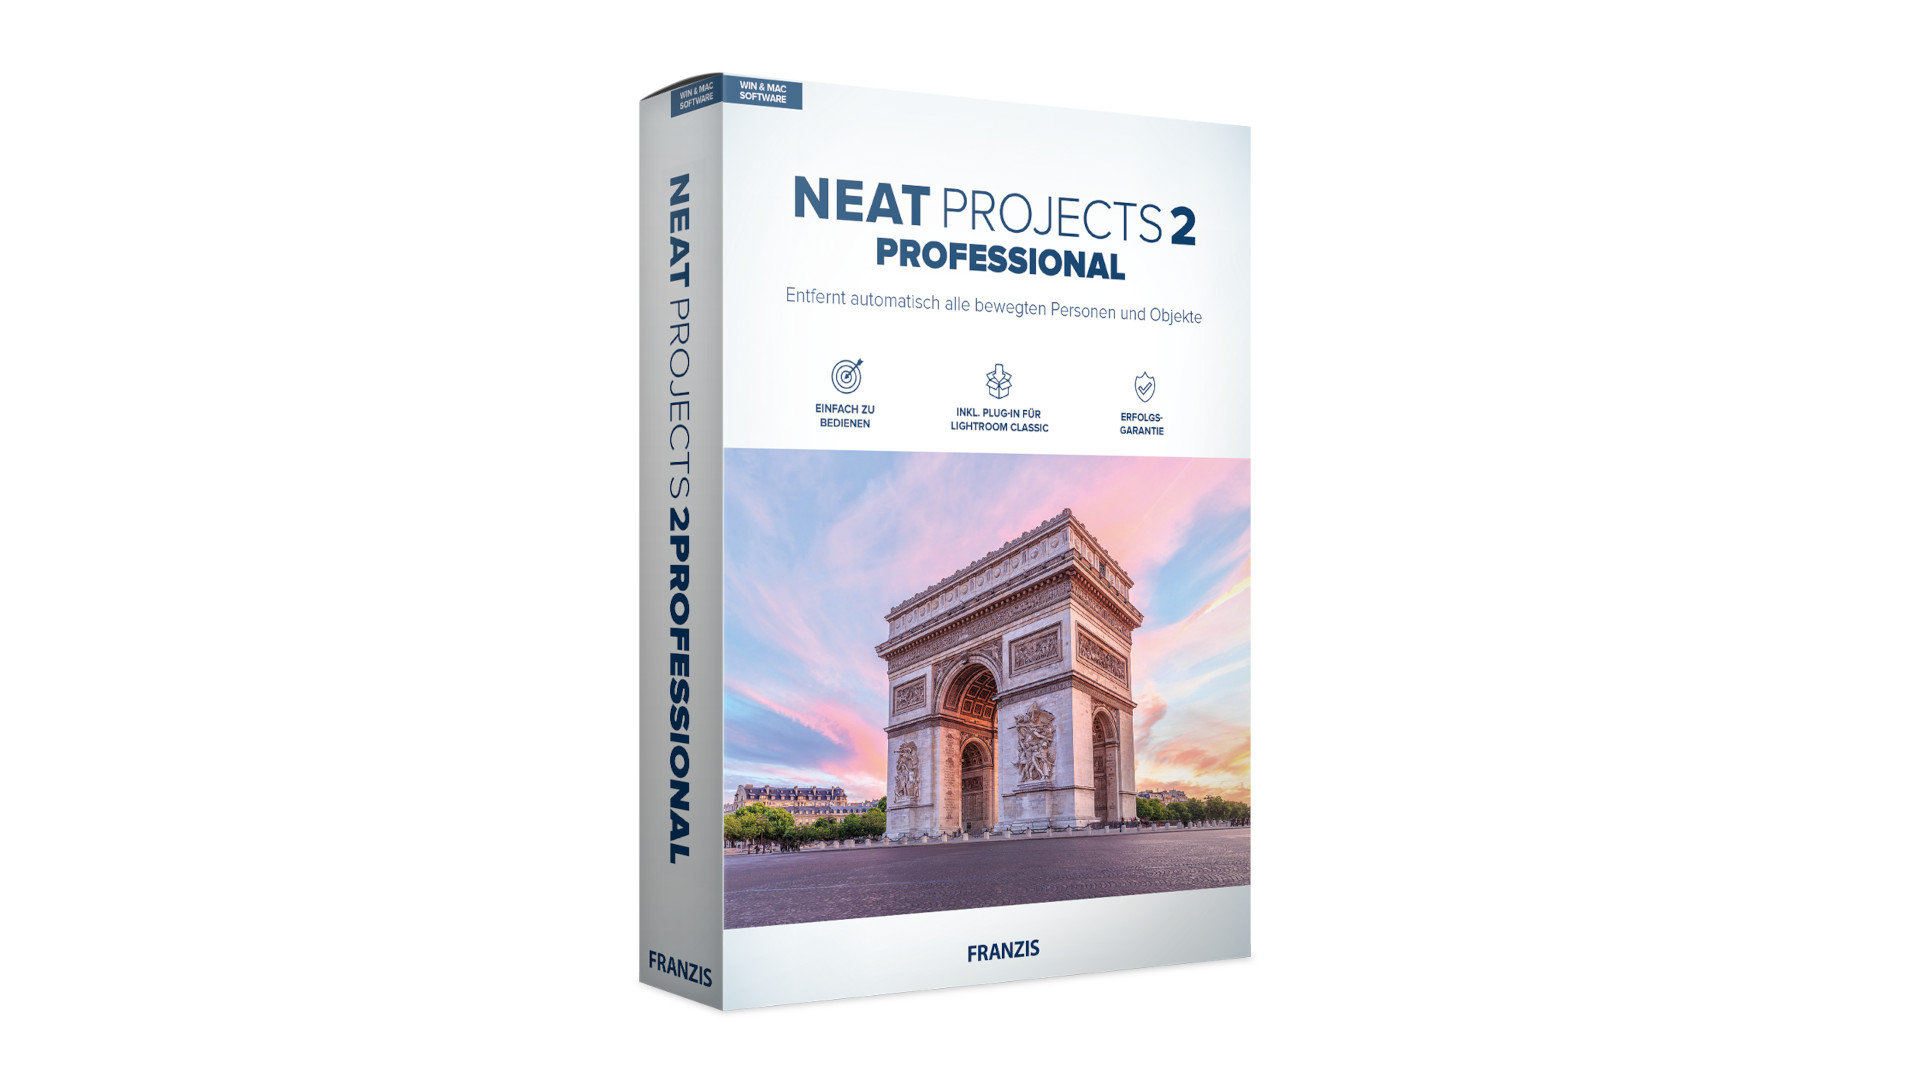 NEAT projects 2 Pro - Project Software Key (Lifetime / 1 PC) 33.89 $